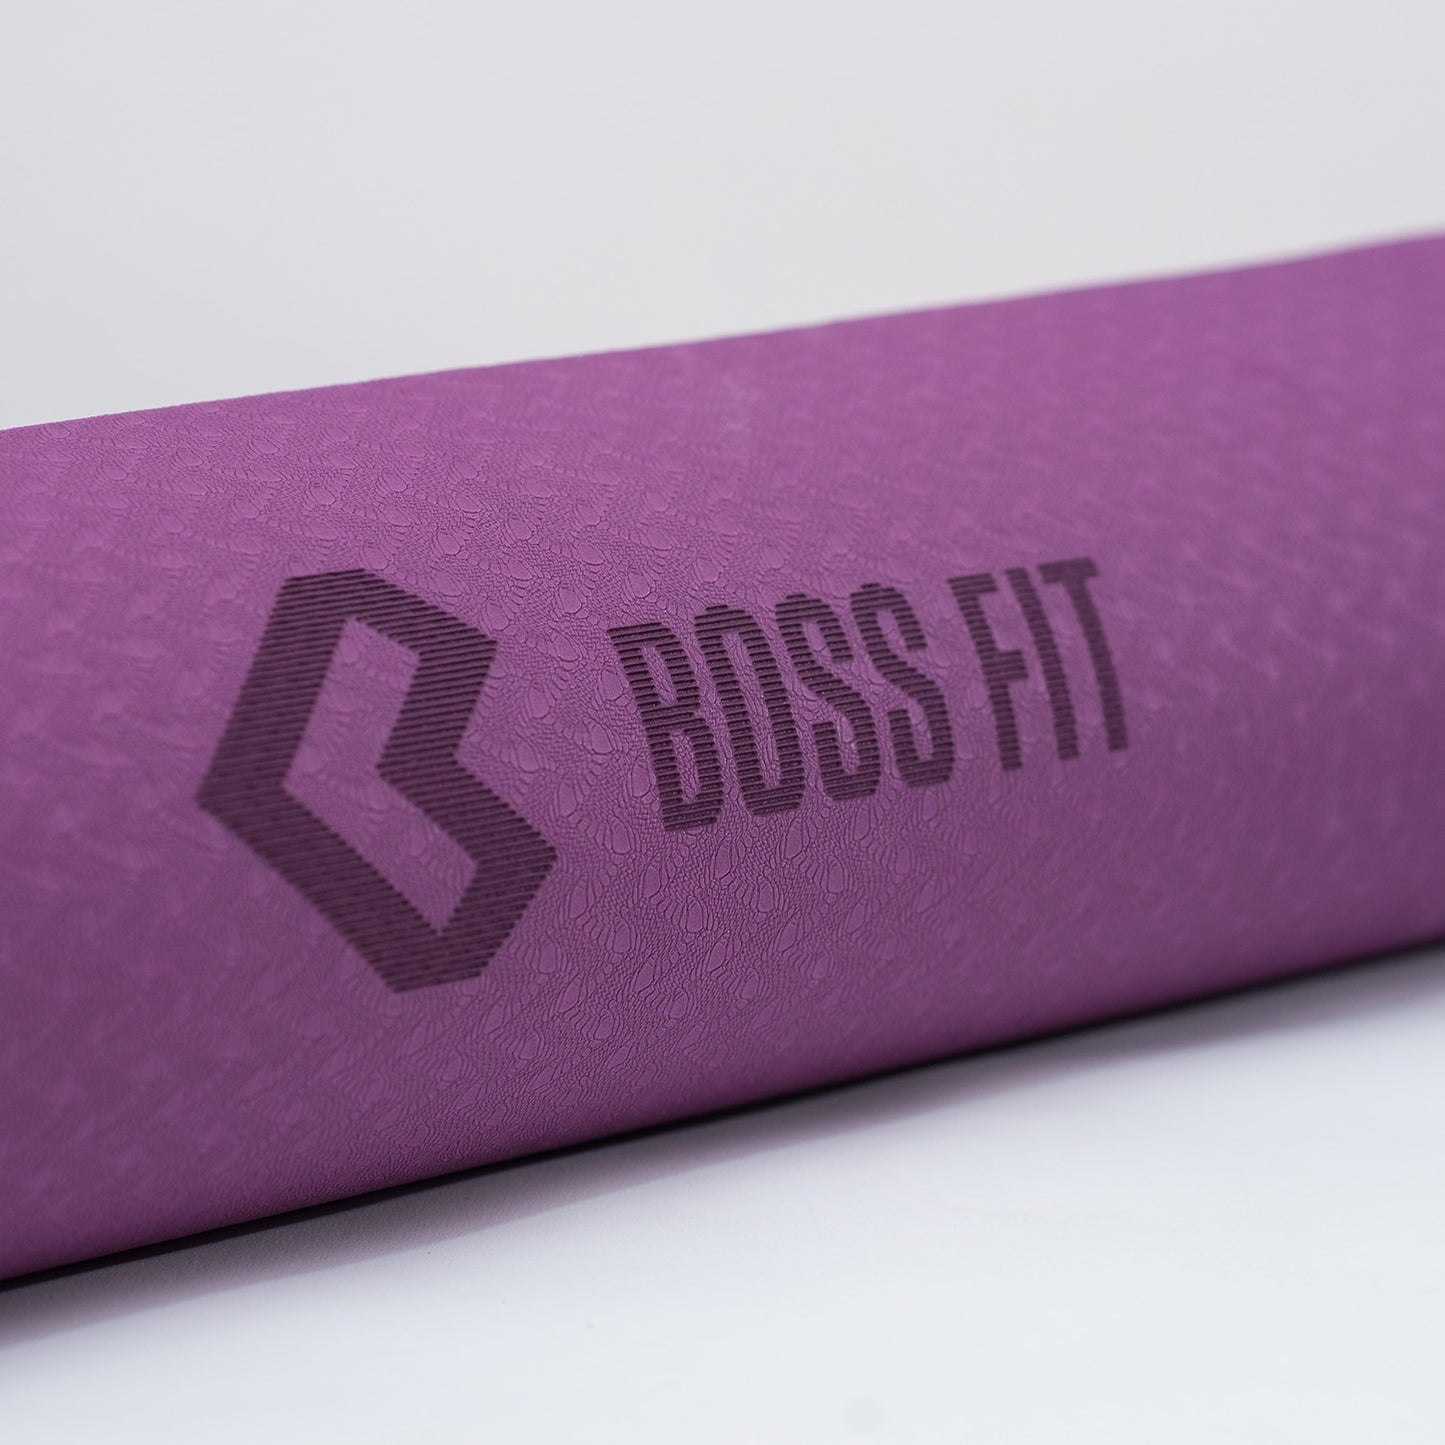 Boss Fit Home Package